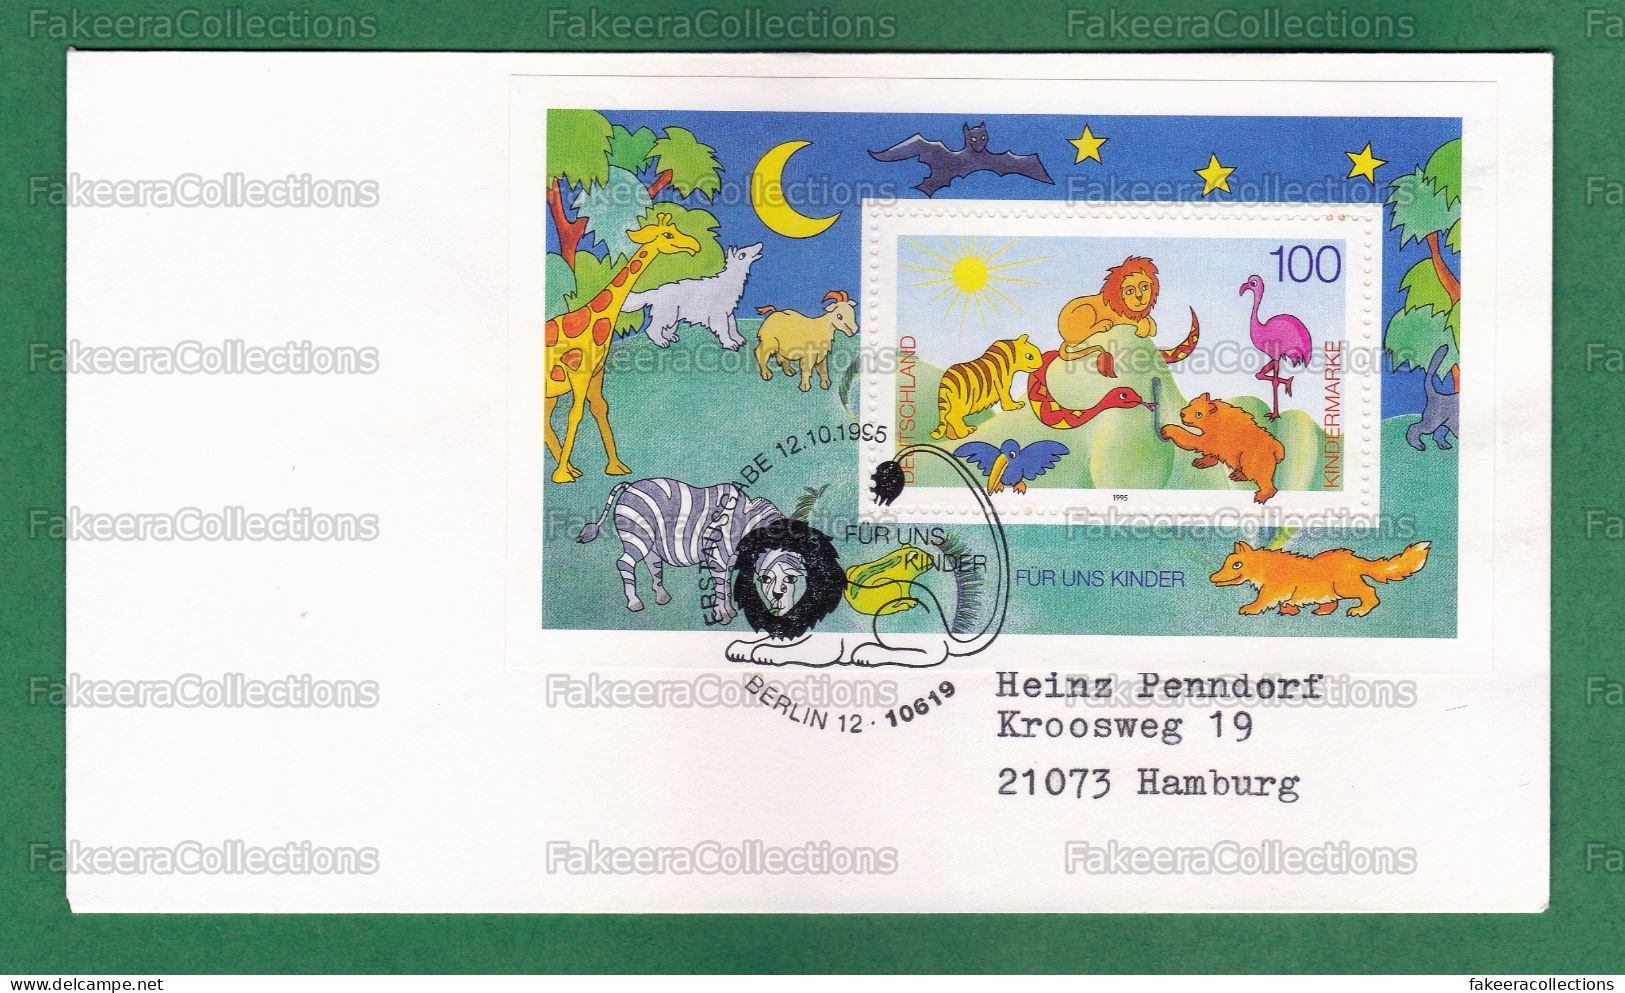 GERMANY 1995 - FOR THE CHILDREN 1v M/S FDC - Postal Used On Date Of Issue - Animals, TIGER, LION, SNAKE, BEAR, BIRDS - Felini